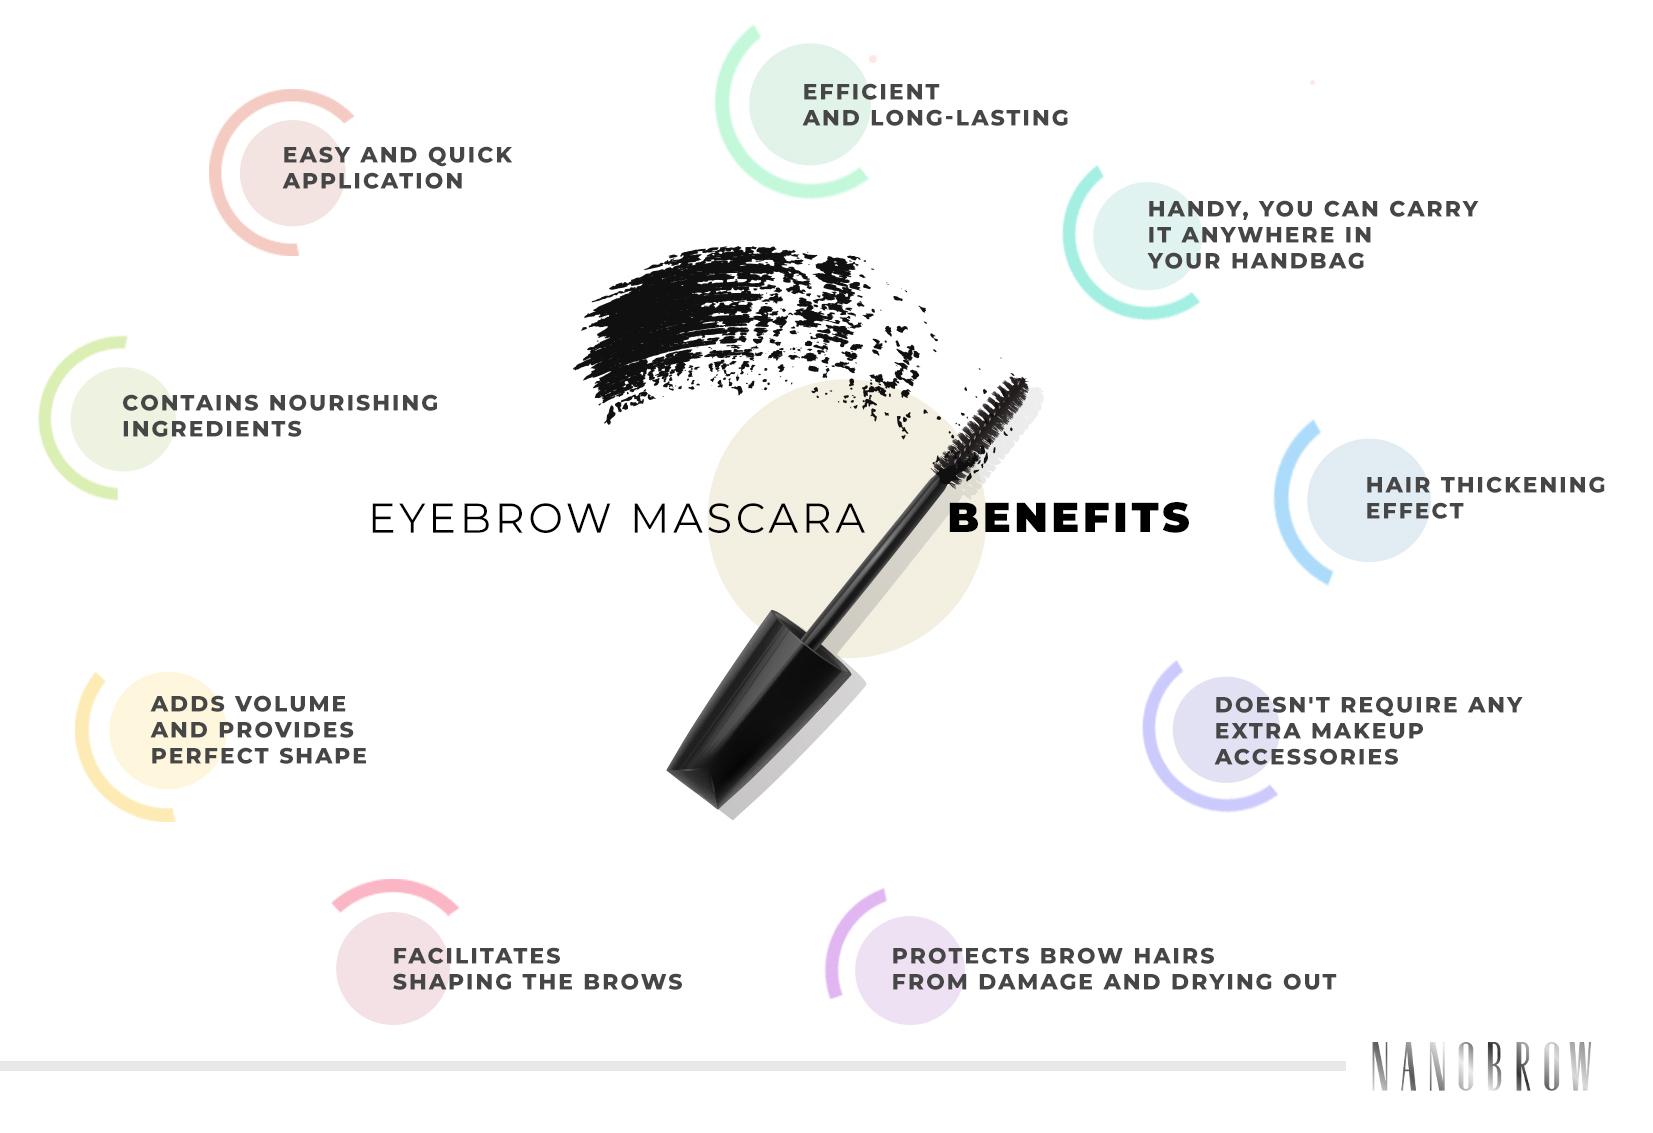 Eyebrow mascara - what makes it different from lash mascara?